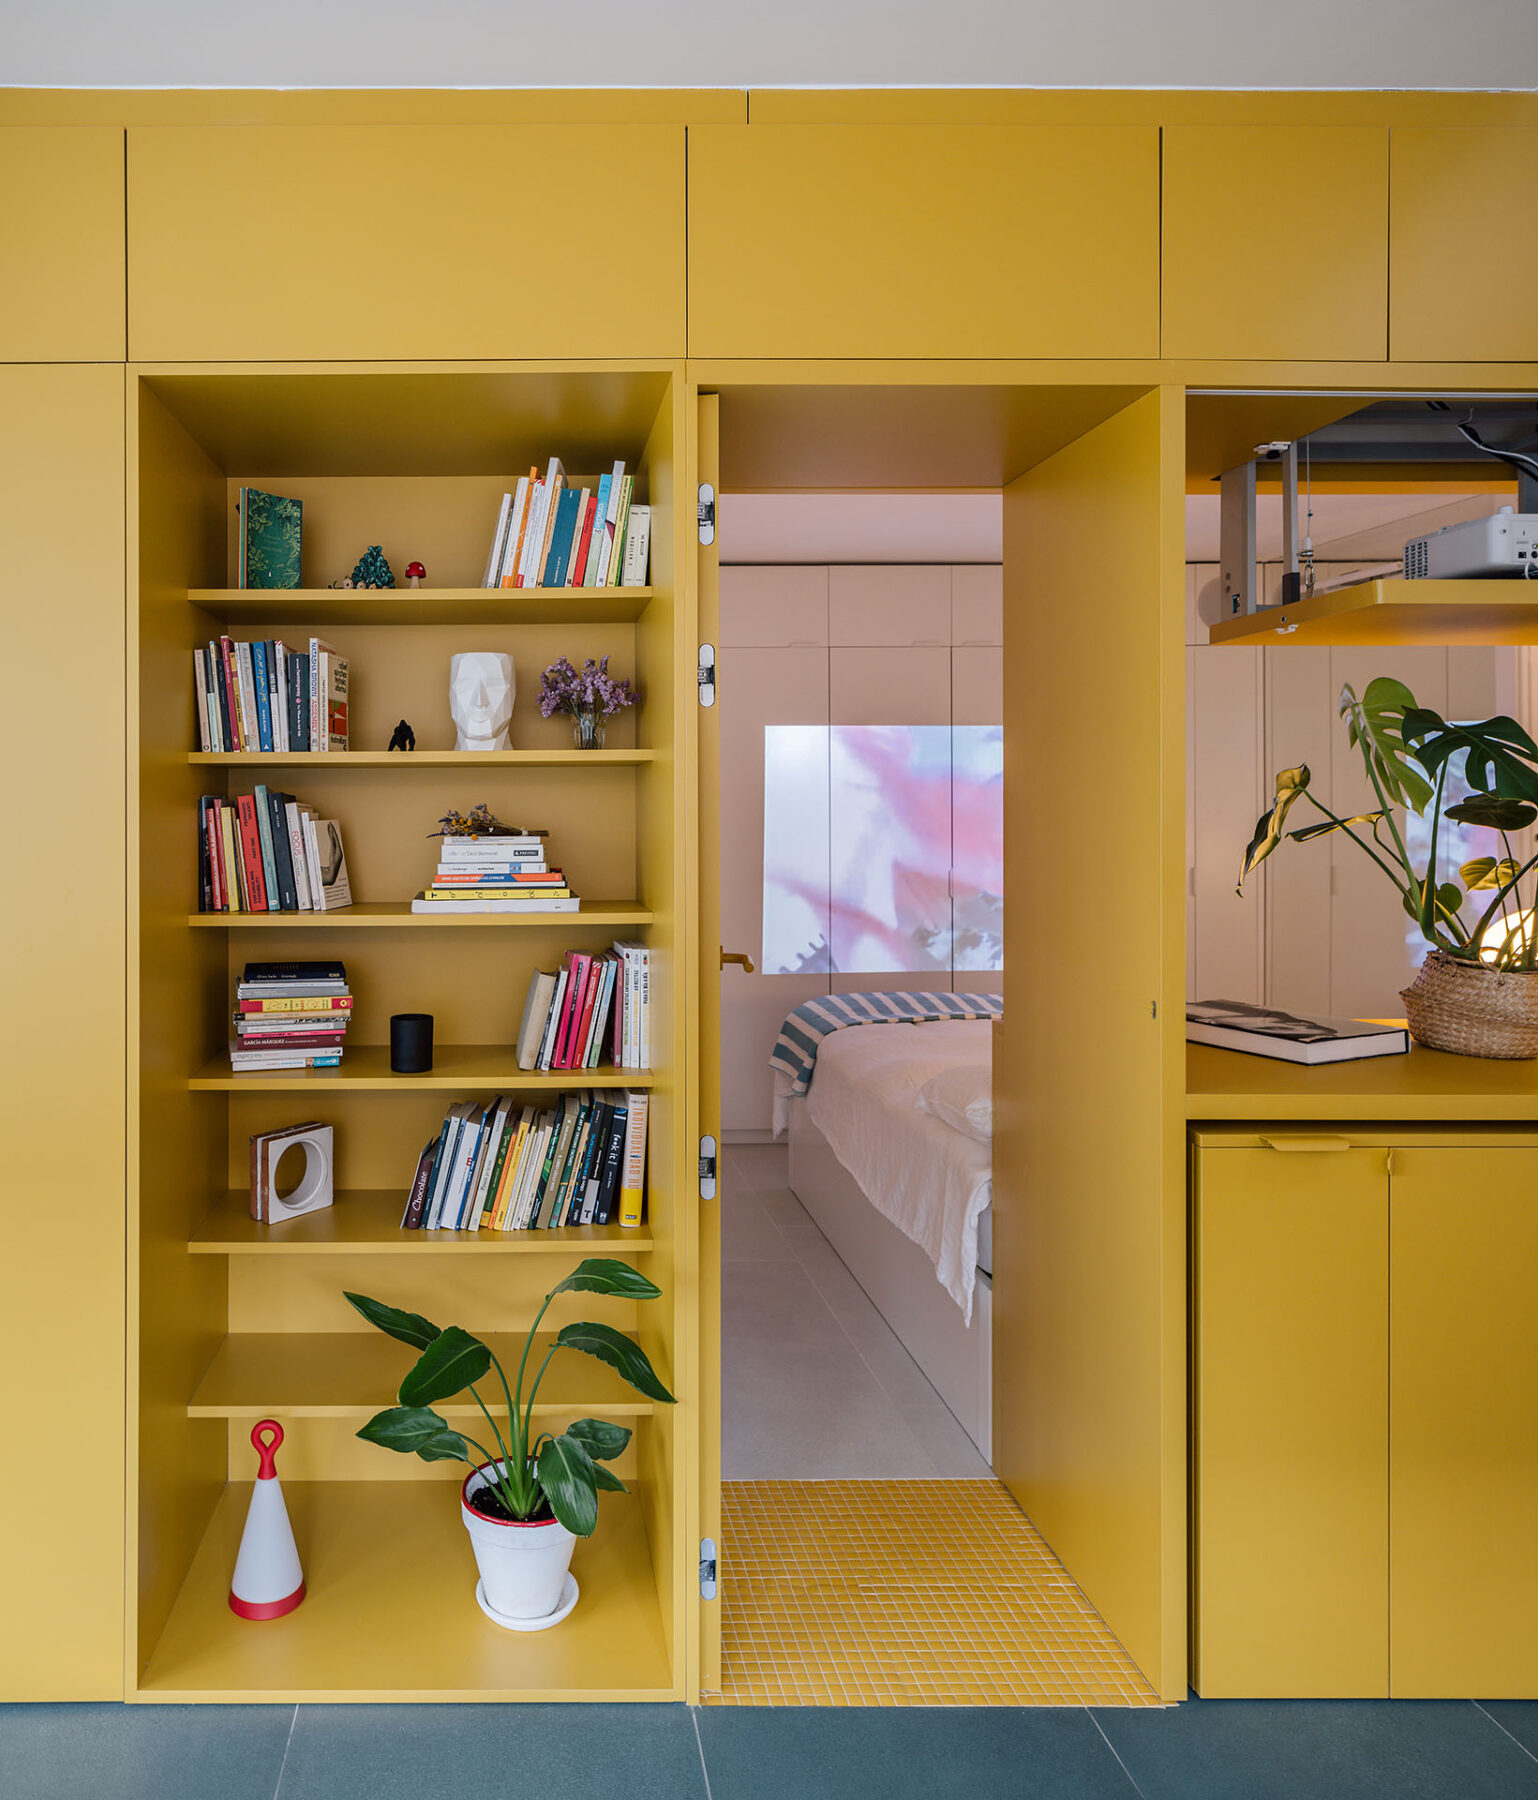 Archisearch Casa Gialla - Renovation of an apartment in Puerta del Sol by gon architects